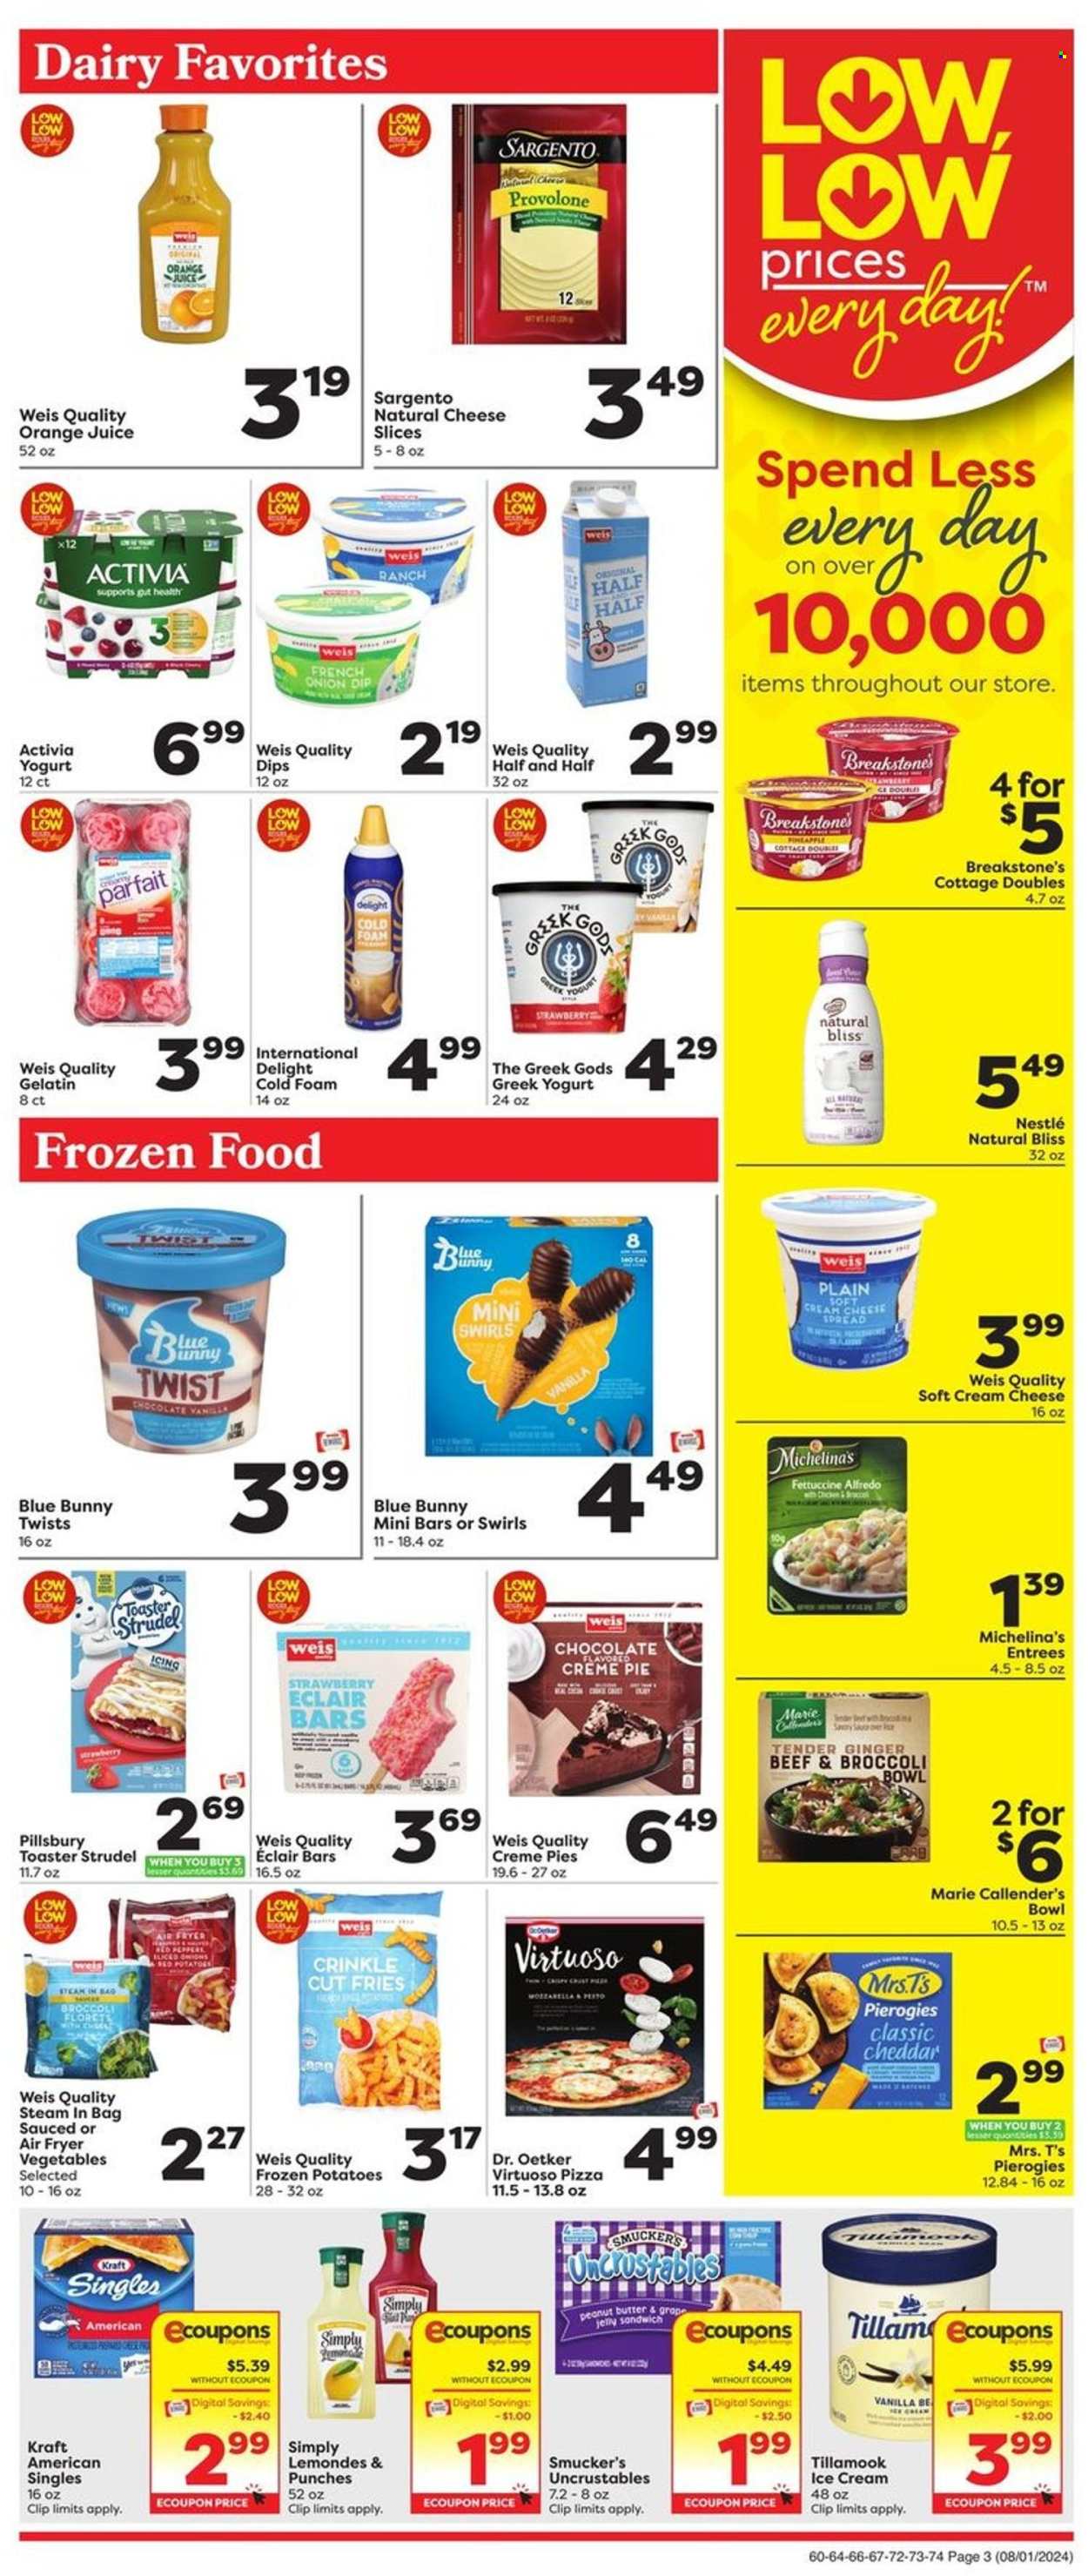 thumbnail - Weis Flyer - 08/01/2024 - 08/07/2024 - Sales products - pie, strudel, potatoes, red potatoes, pizza, Pillsbury, Marie Callender's, Kraft®, ready meal, cheese spread, cottage cheese, sandwich slices, sliced cheese, cheddar, cheese, Dr. Oetker, Kraft Singles, Provolone, Sargento, greek yoghurt, Activia, dip, ice cream, Blue Bunny, potato fries, Nestlé, pesto, grape jelly, peanut butter, orange juice, juice, Half and half, gelatin. Page 3.